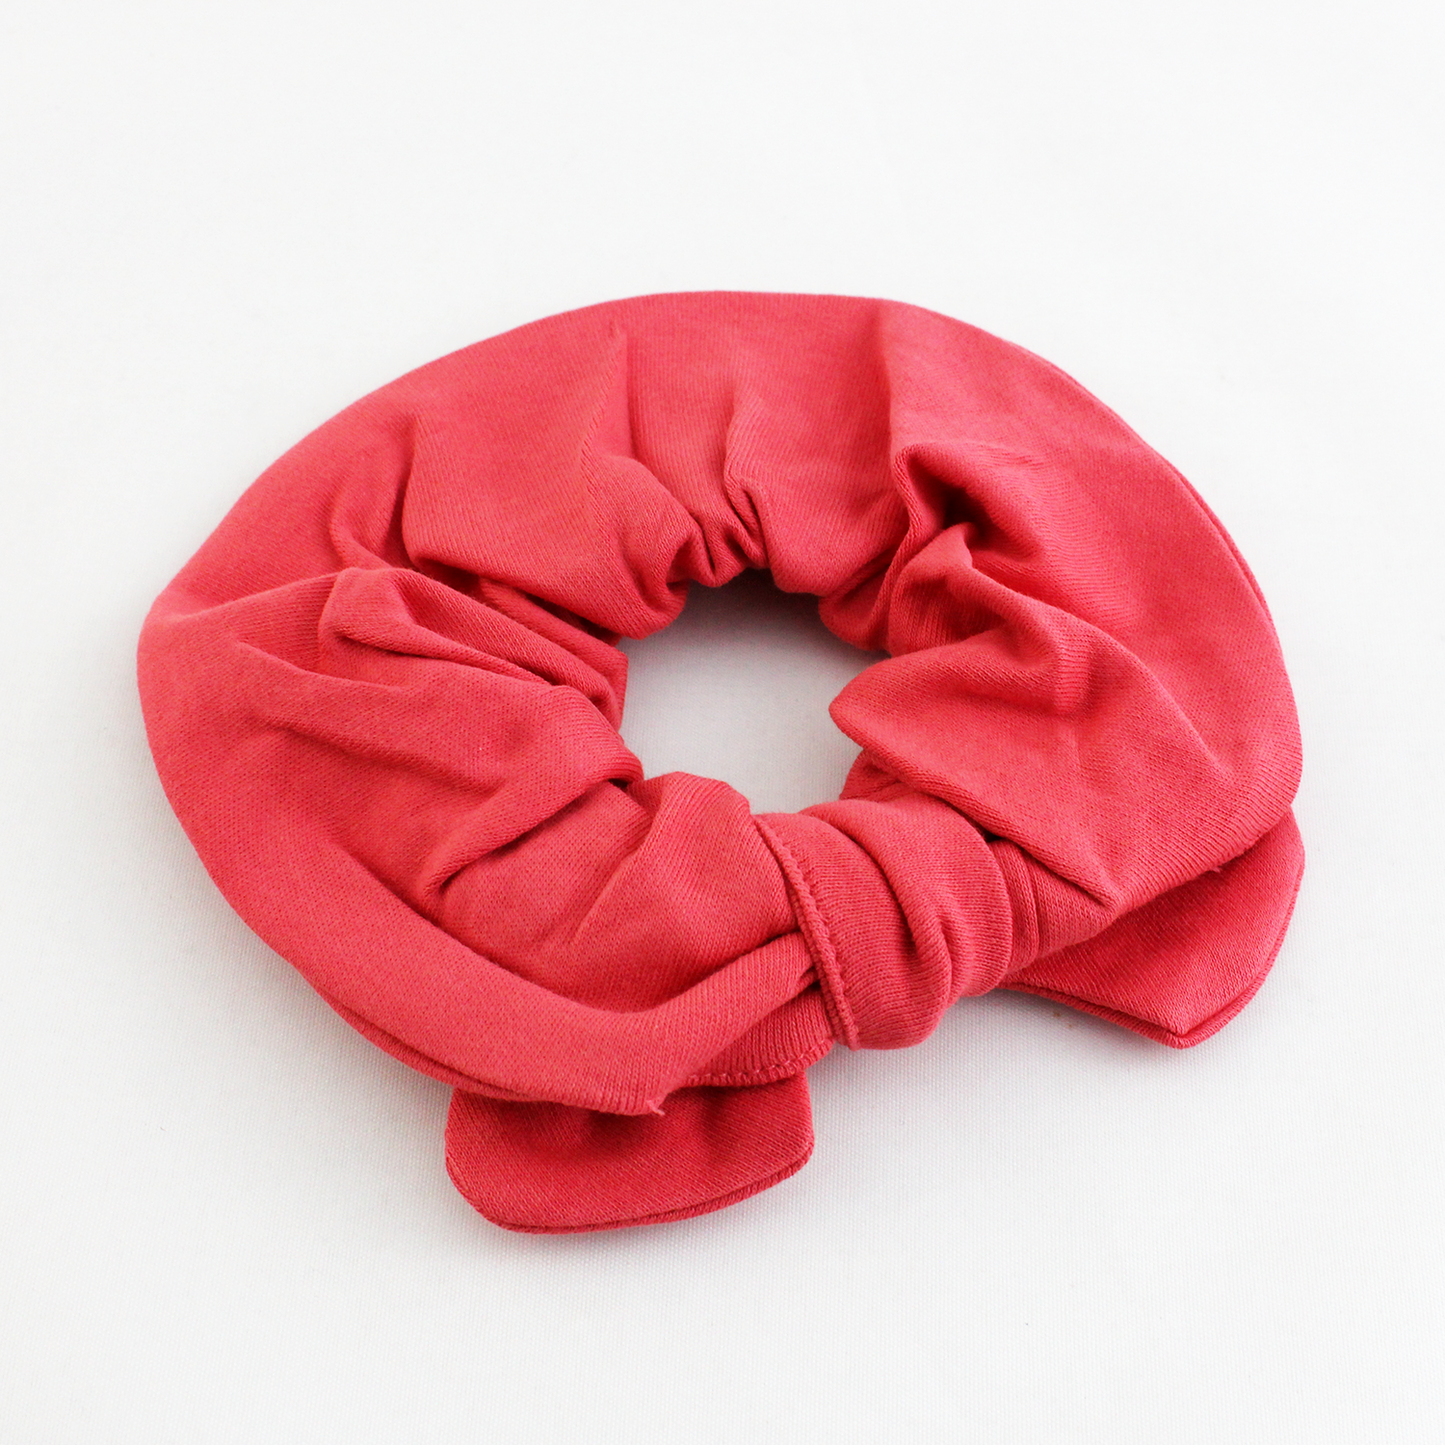 Endanzoo Organic Cotton Scrunchies for Mom - Pink